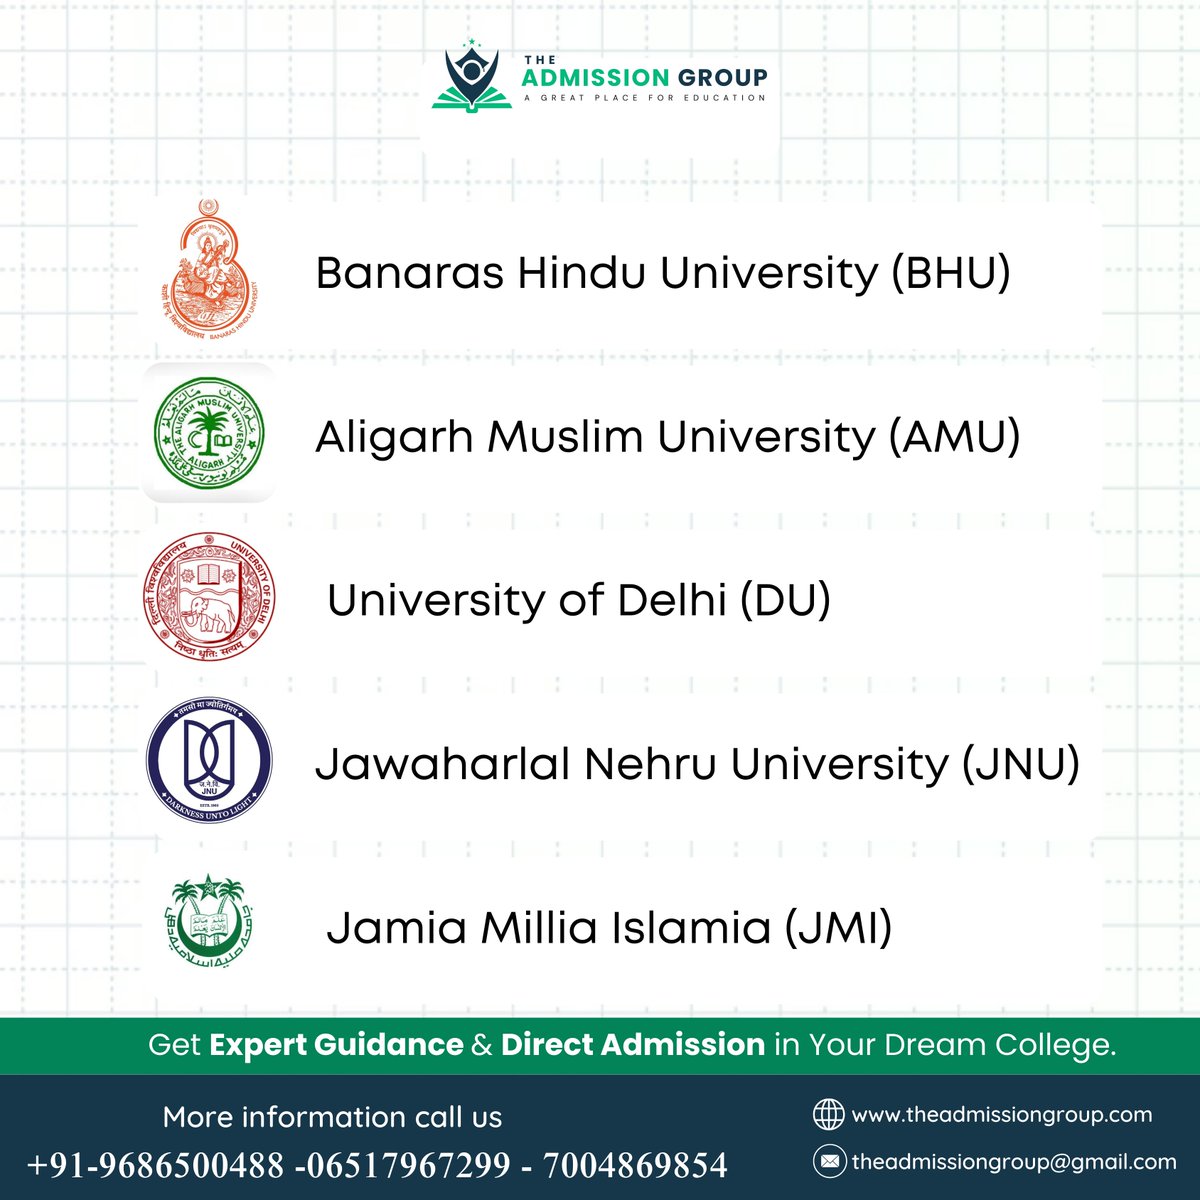 Explore the best higher education options with the top 5 NIRF ranking colleges accepting CUET scores in 2024.

#CUET2024 #NIRFRanking #HigherEducation #TopColleges #FutureChoice #CUETScores #CollegeAdmissions #ExploreOptions #BestColleges #MakeTheRightChoice #theadmissiongroup